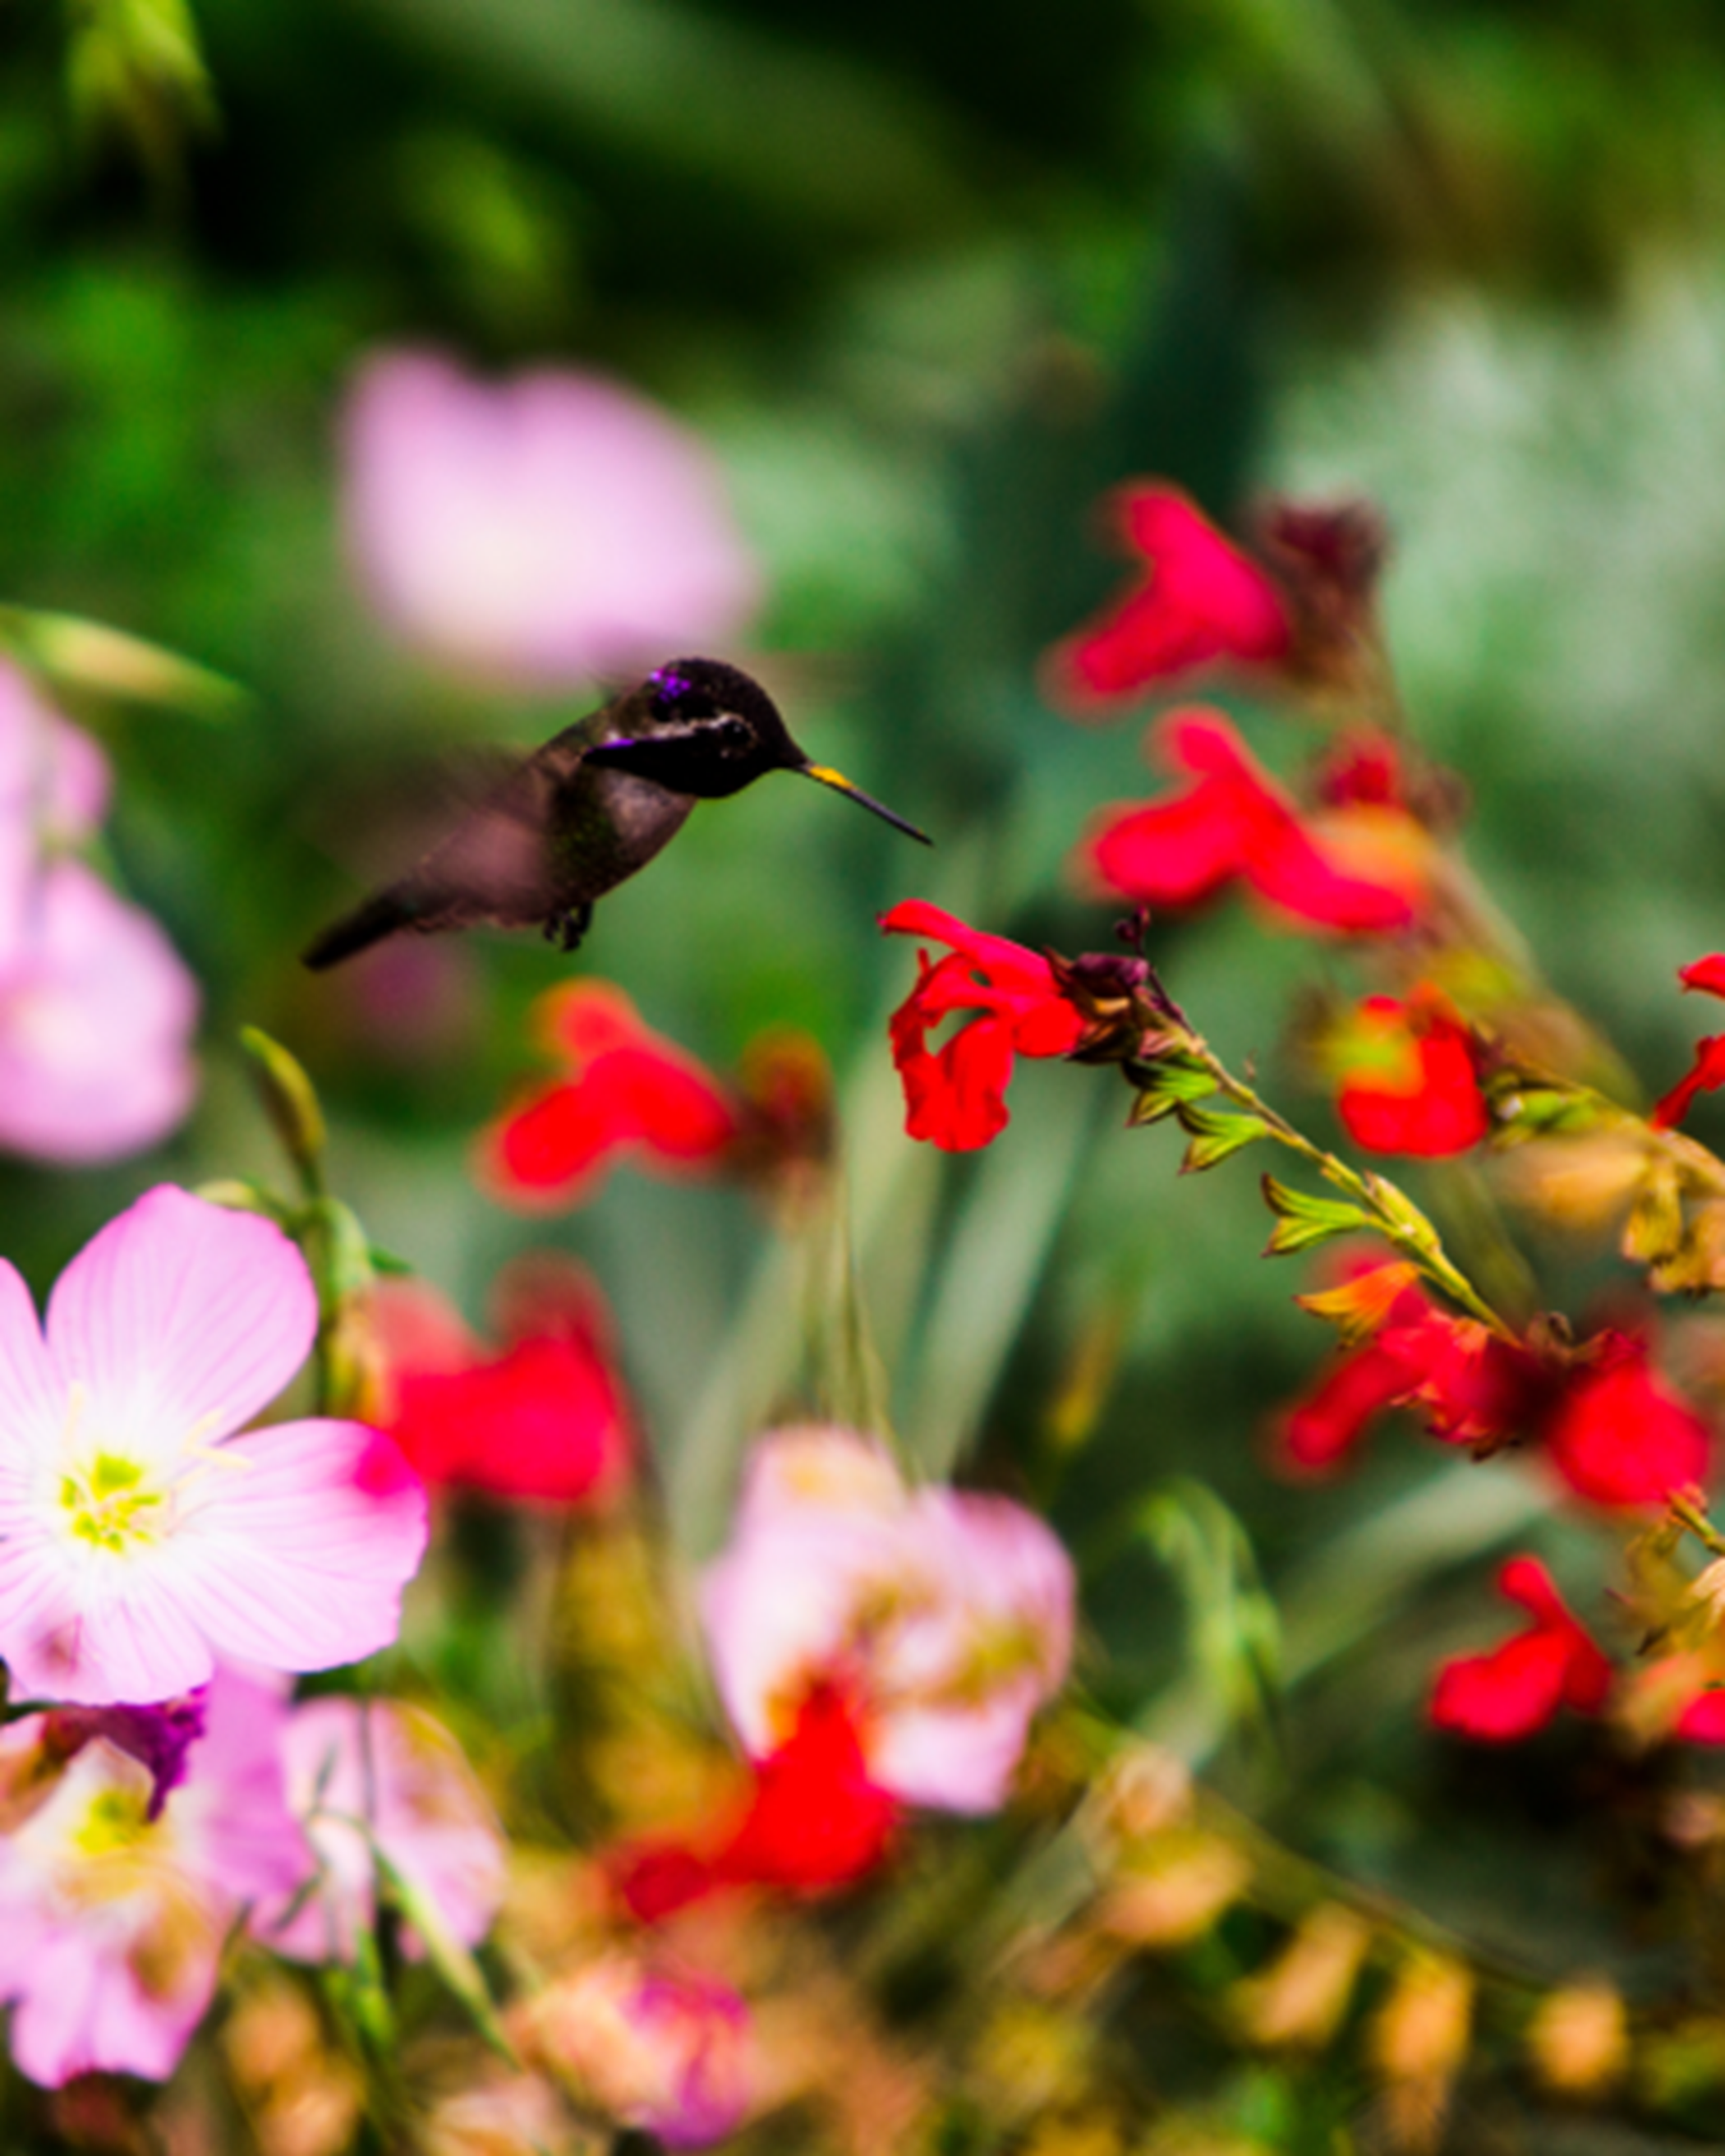 Hummingbird sipping from red flowers